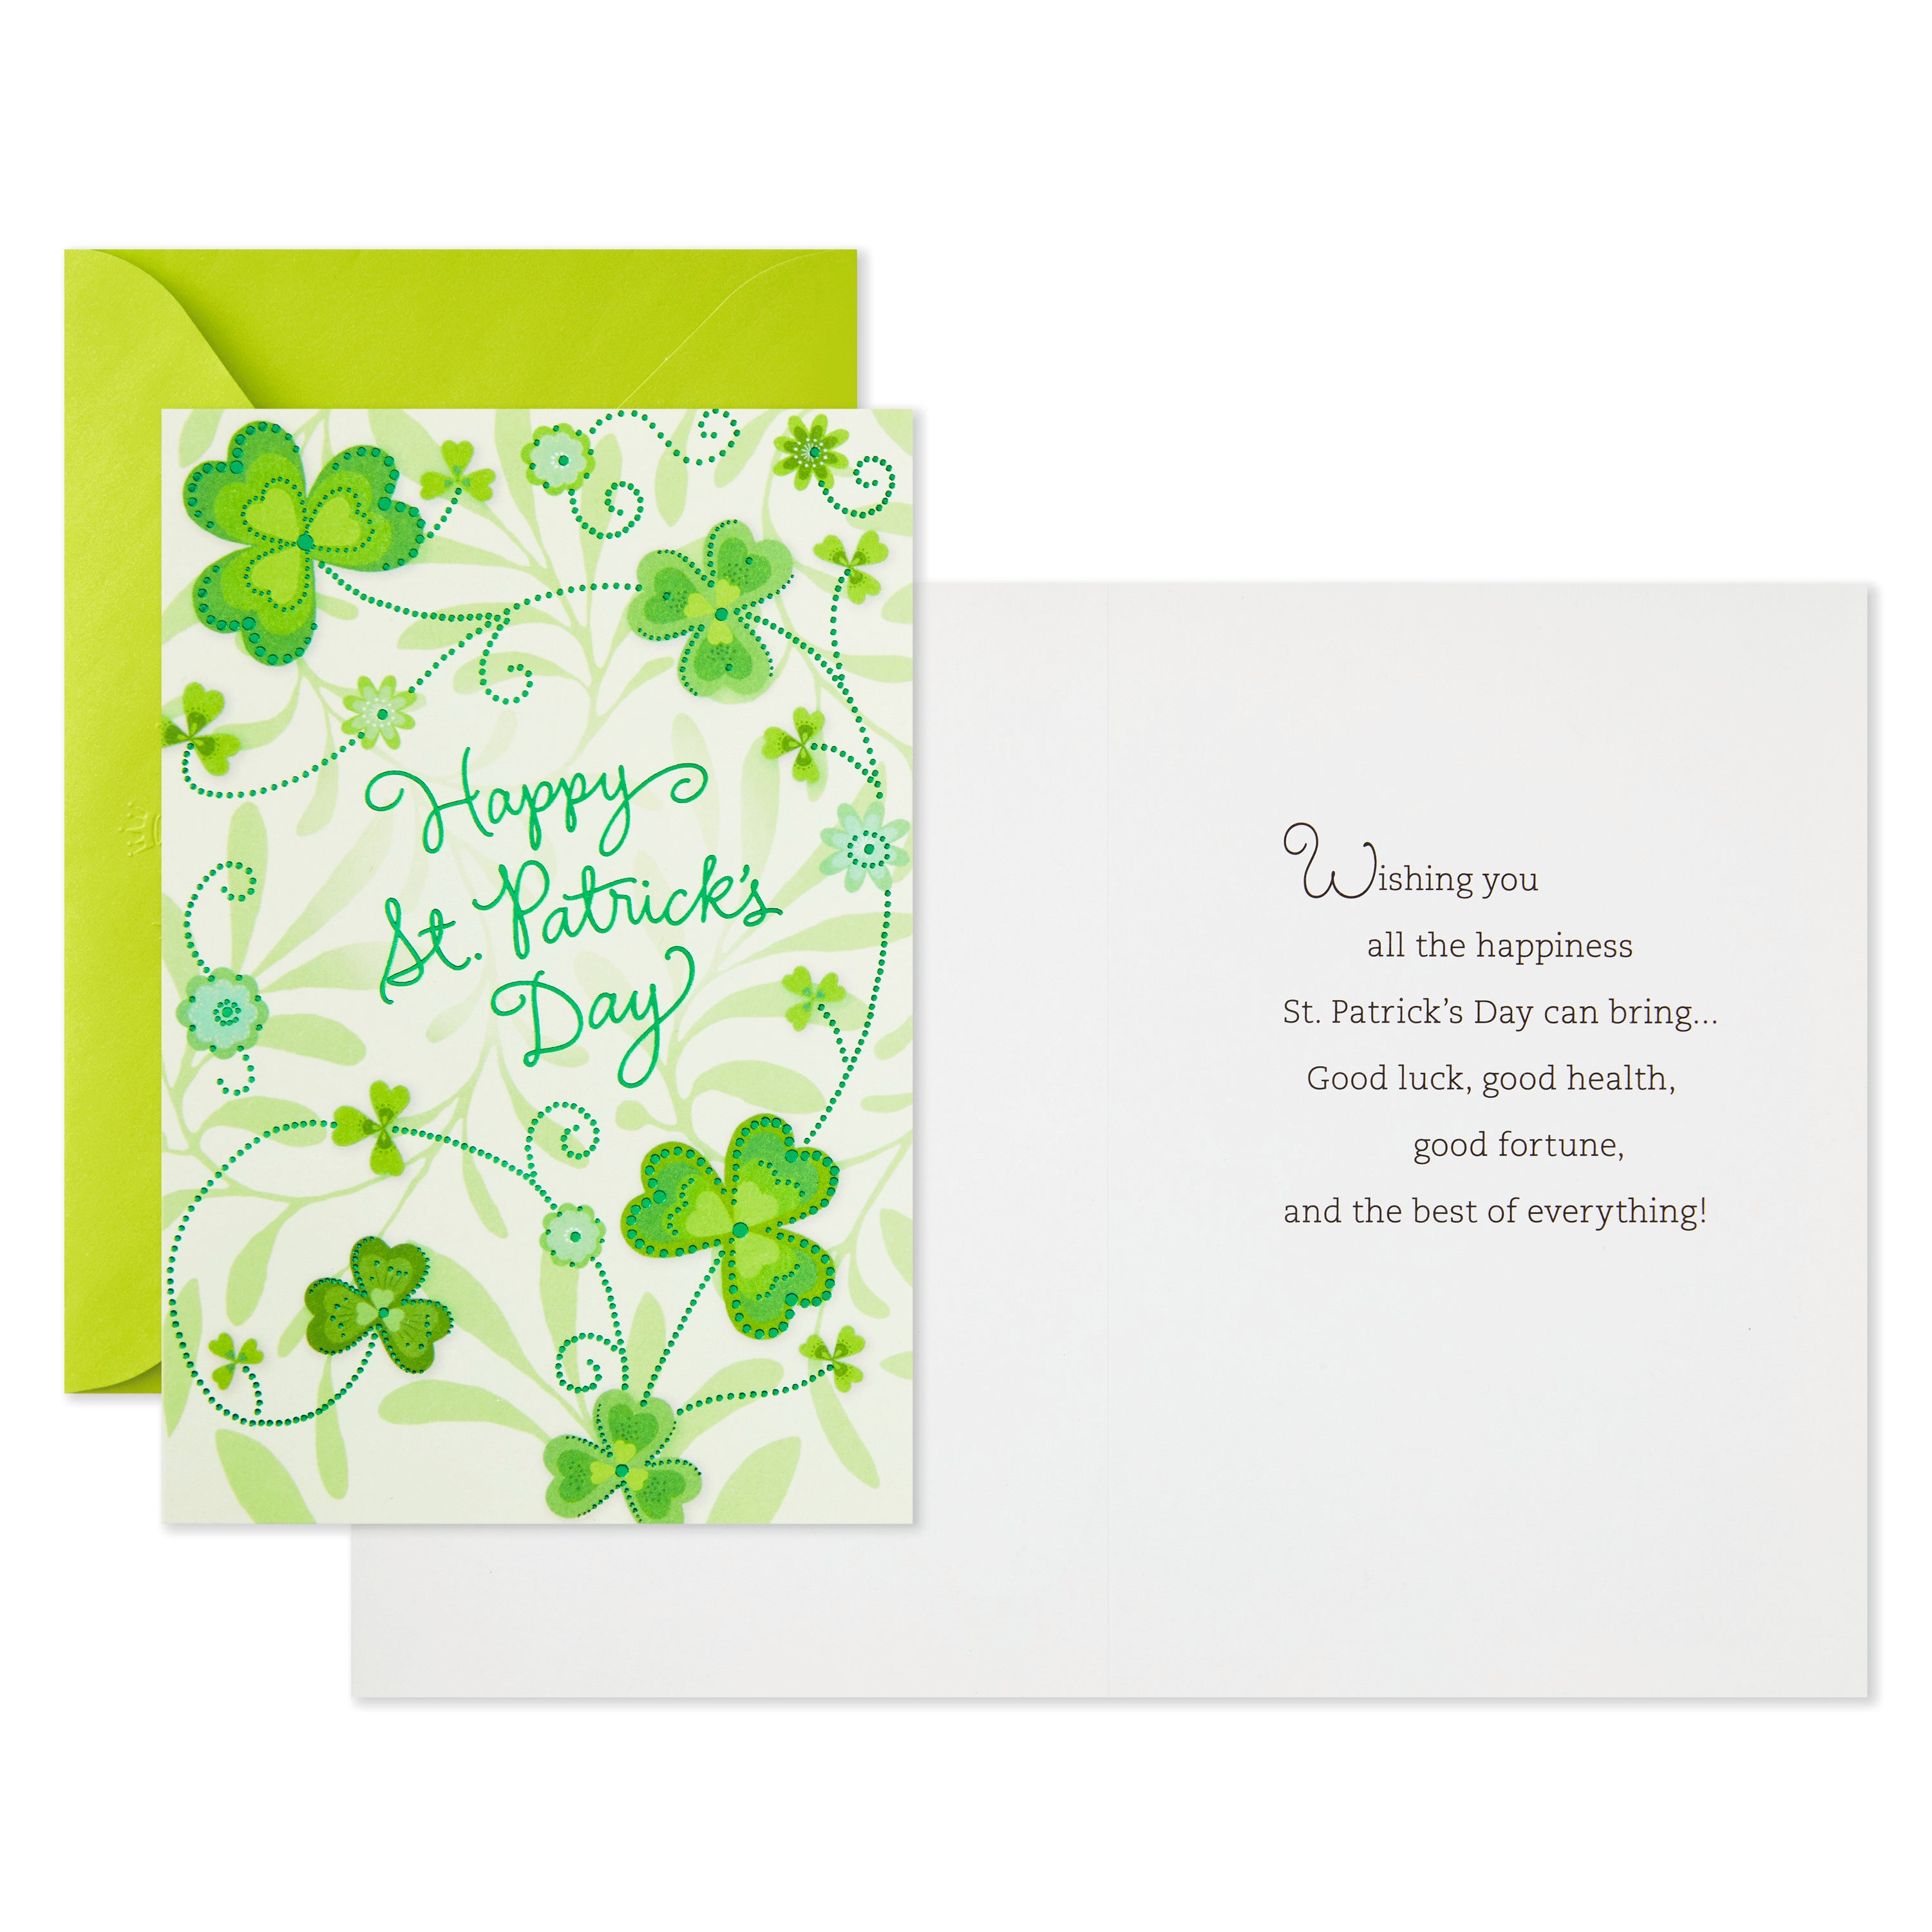 Pack of St. Patricks Day Cards, Best of Everything (6 Cards with Envelopes)